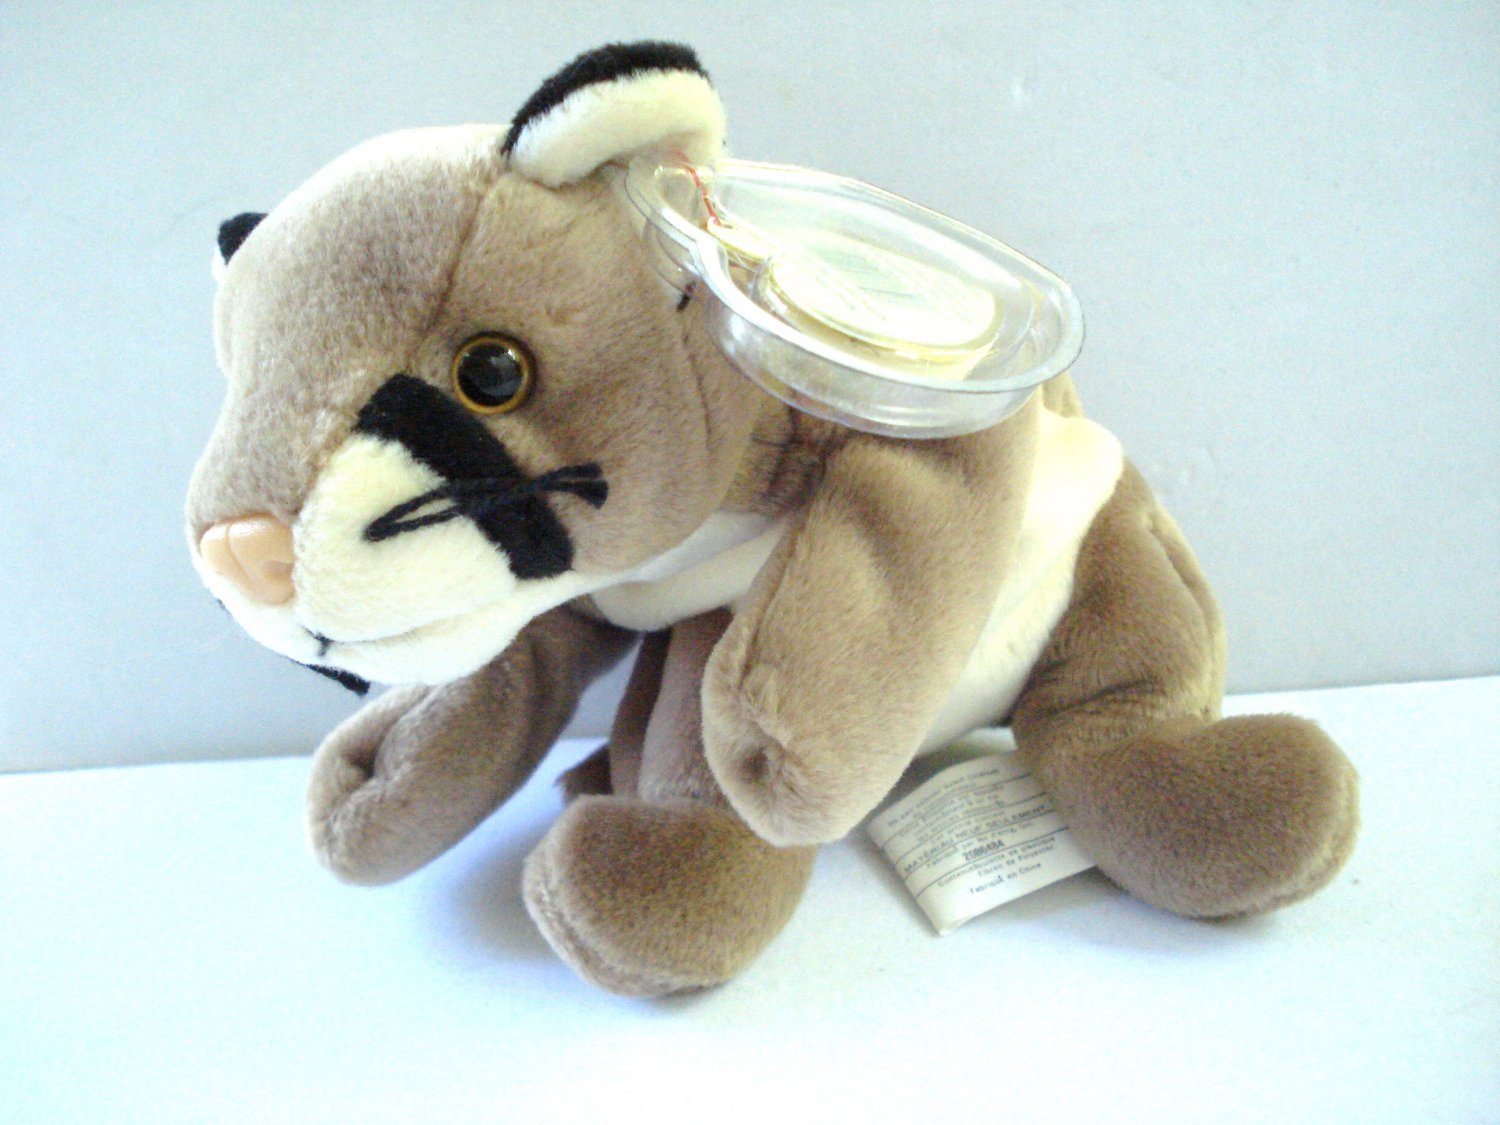 Canyon the cougar 1998 Ty Beanie Baby toy retired mint hc2969